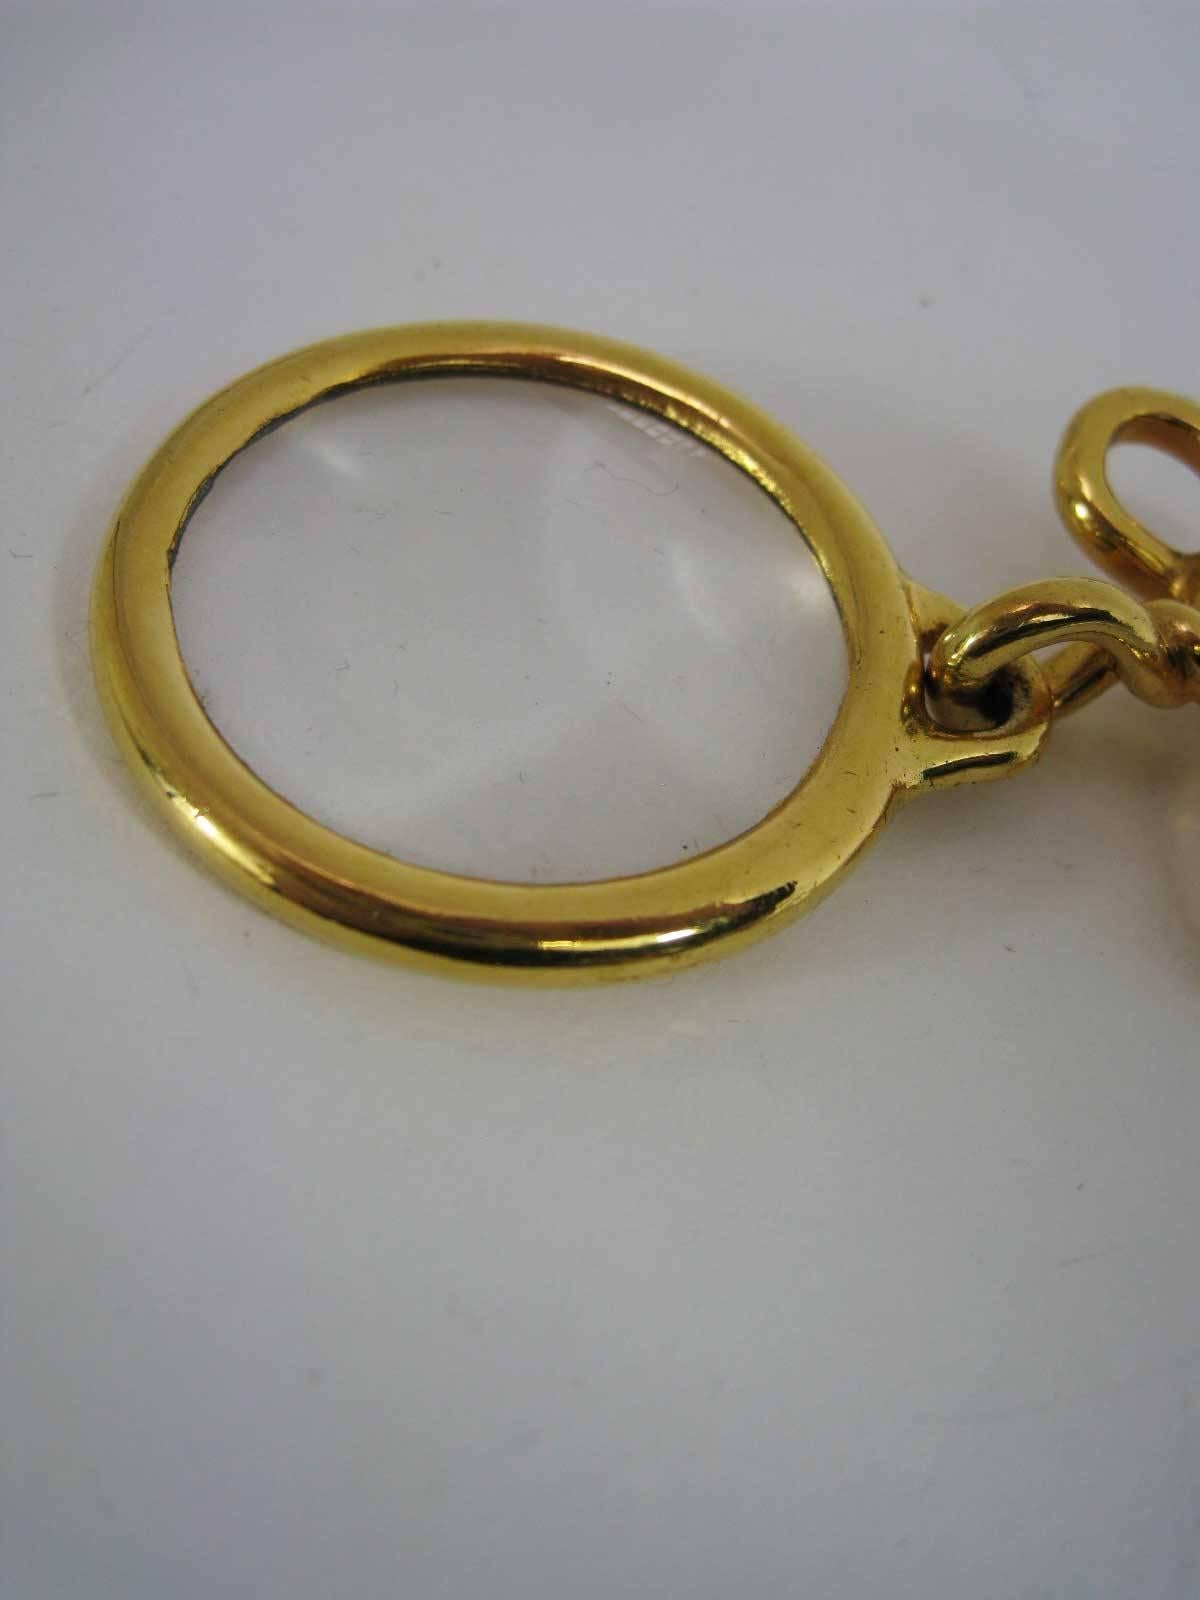 Chanel chain necklace with large magnifying glass loupe pendant.

High gloss gold-tone gilt metal with considerable weight.

Long interlinked chain.

Large round glass magnifier with small CC on pendant with Chanel stamp on back.

Stamped 93 P